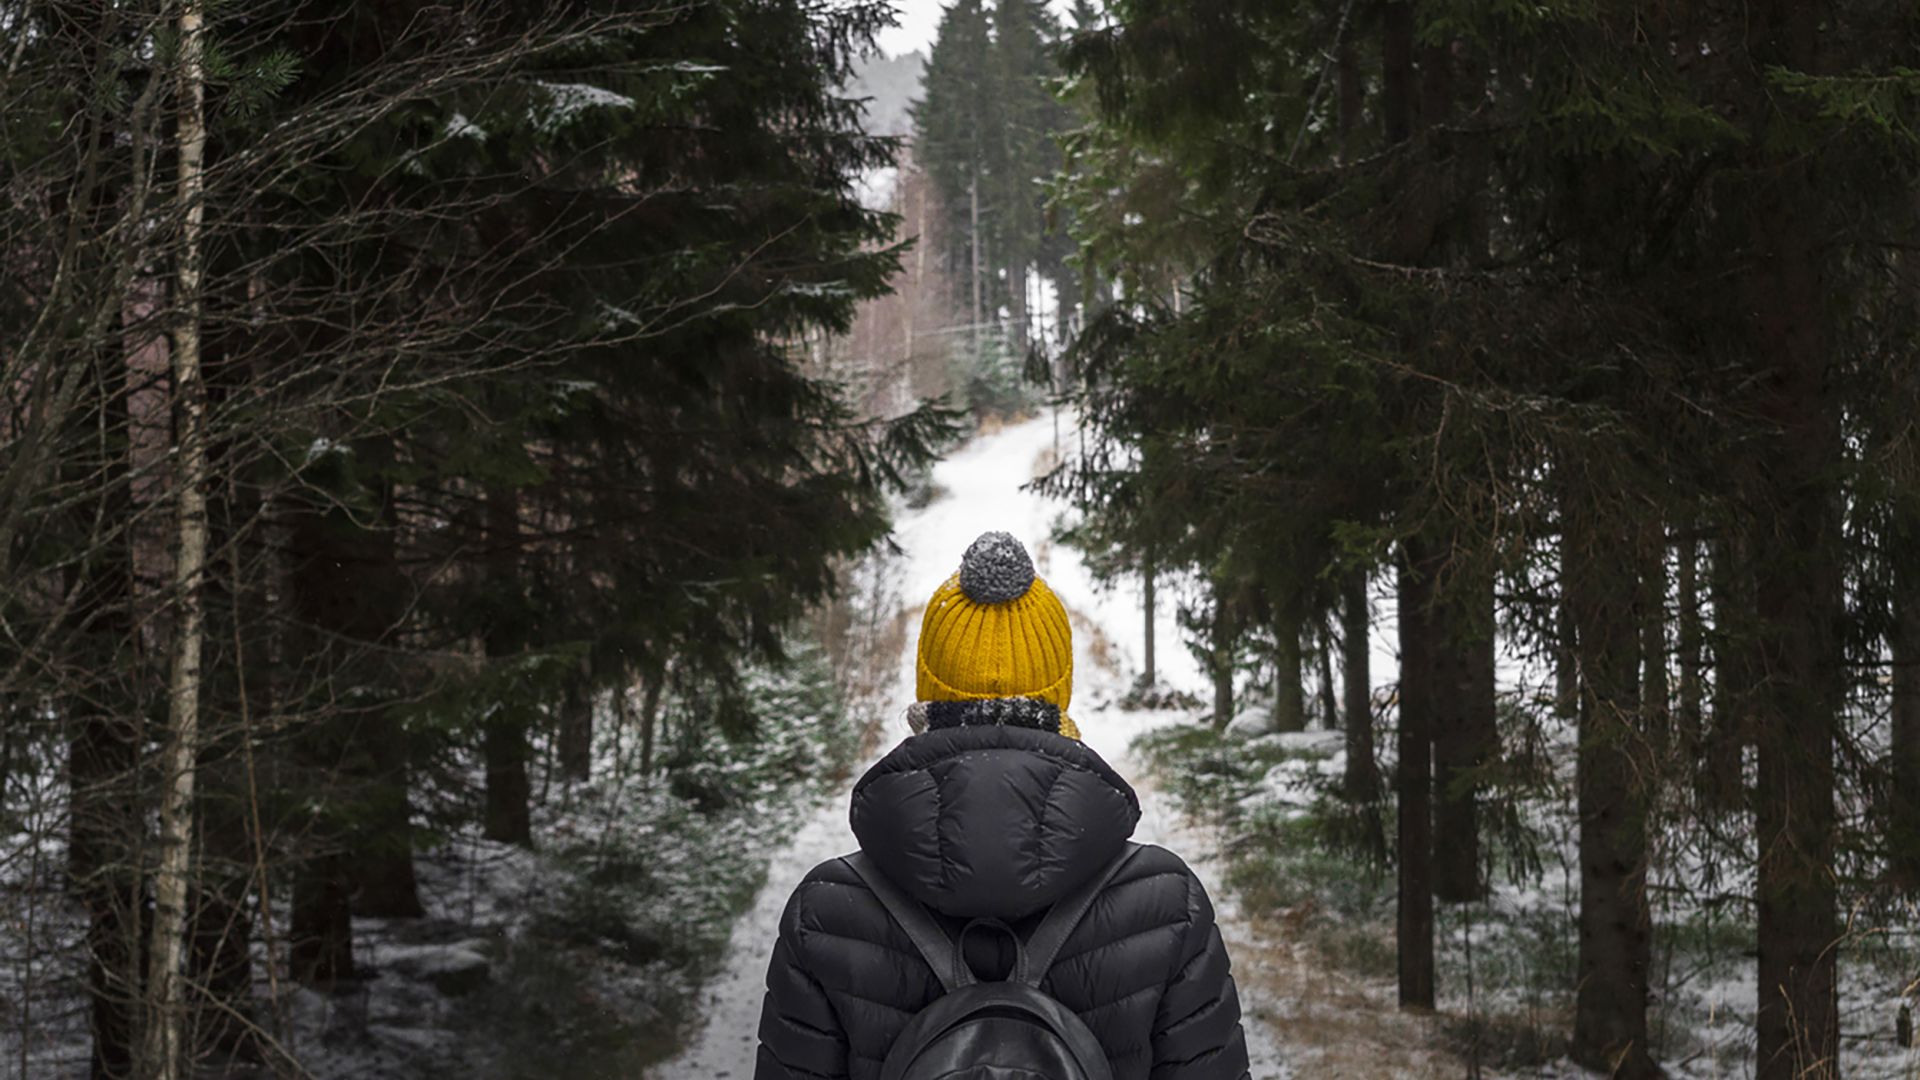 A Person Walking On A Snowy Wooded Path